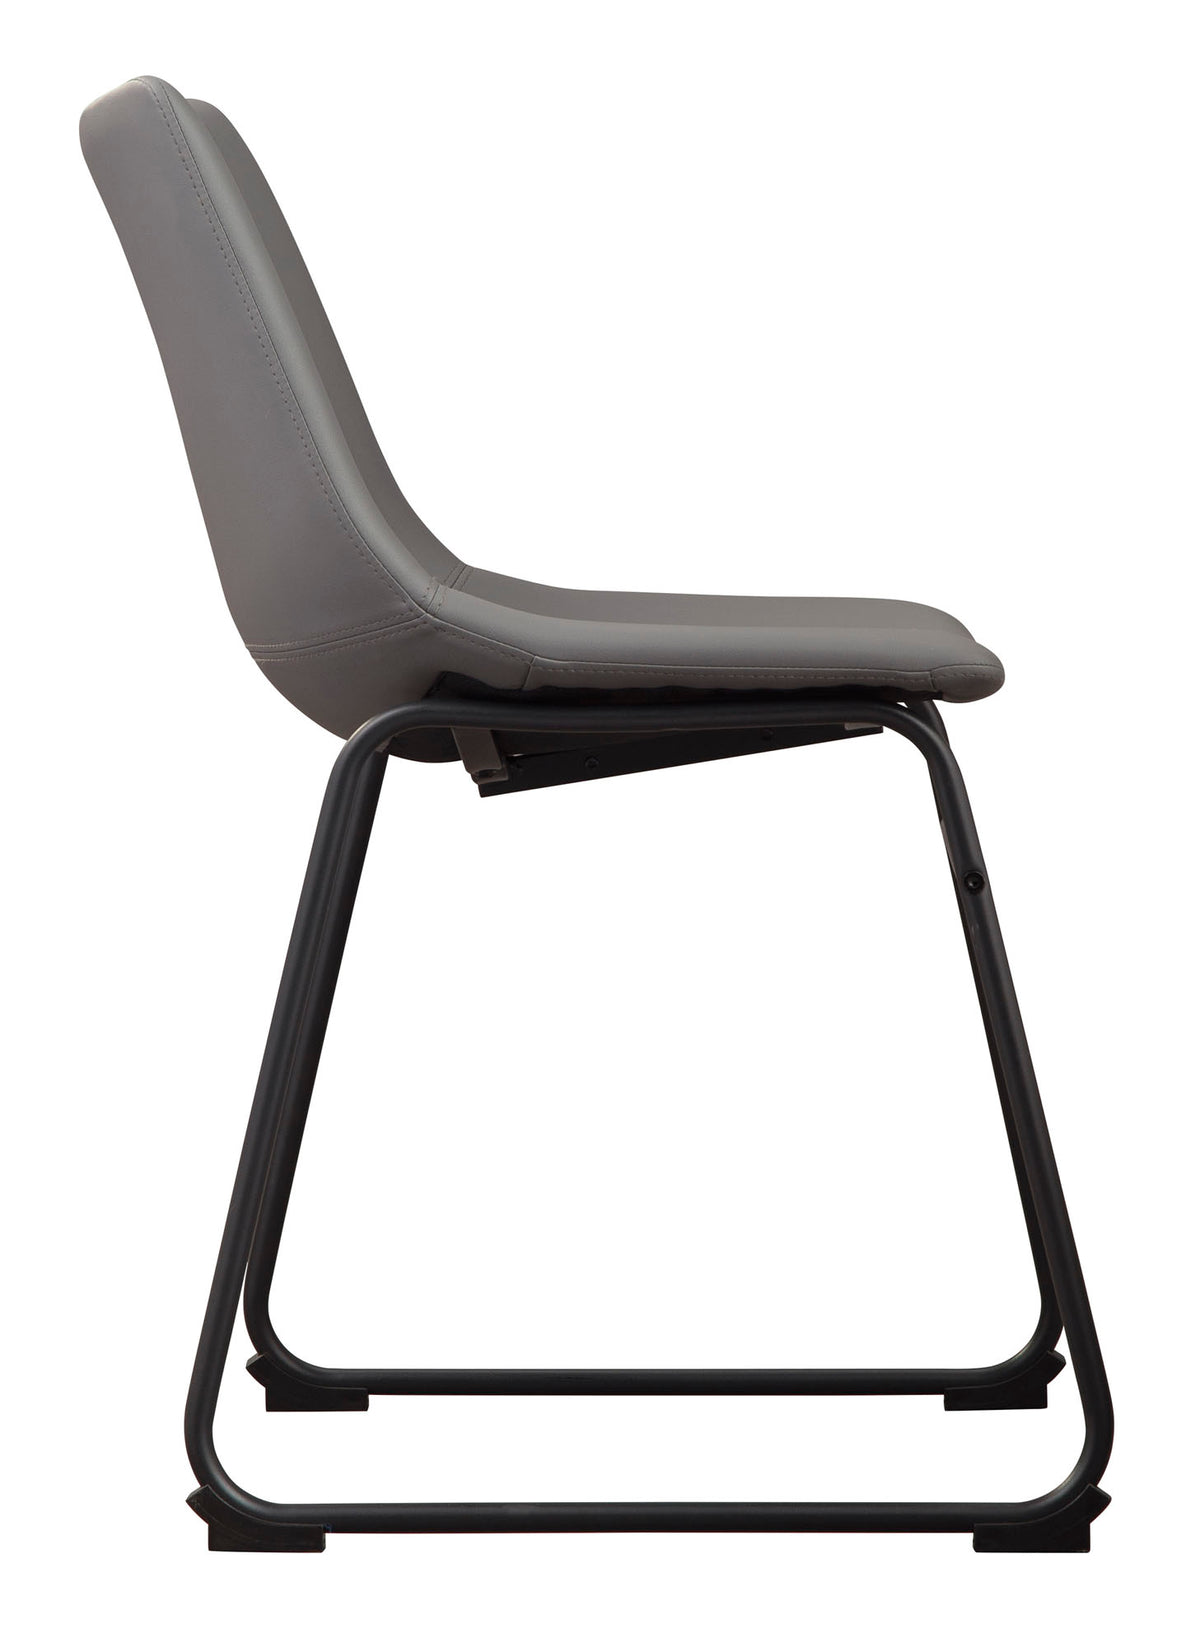 Centiar Gray Dining Chair - MJM Furniture